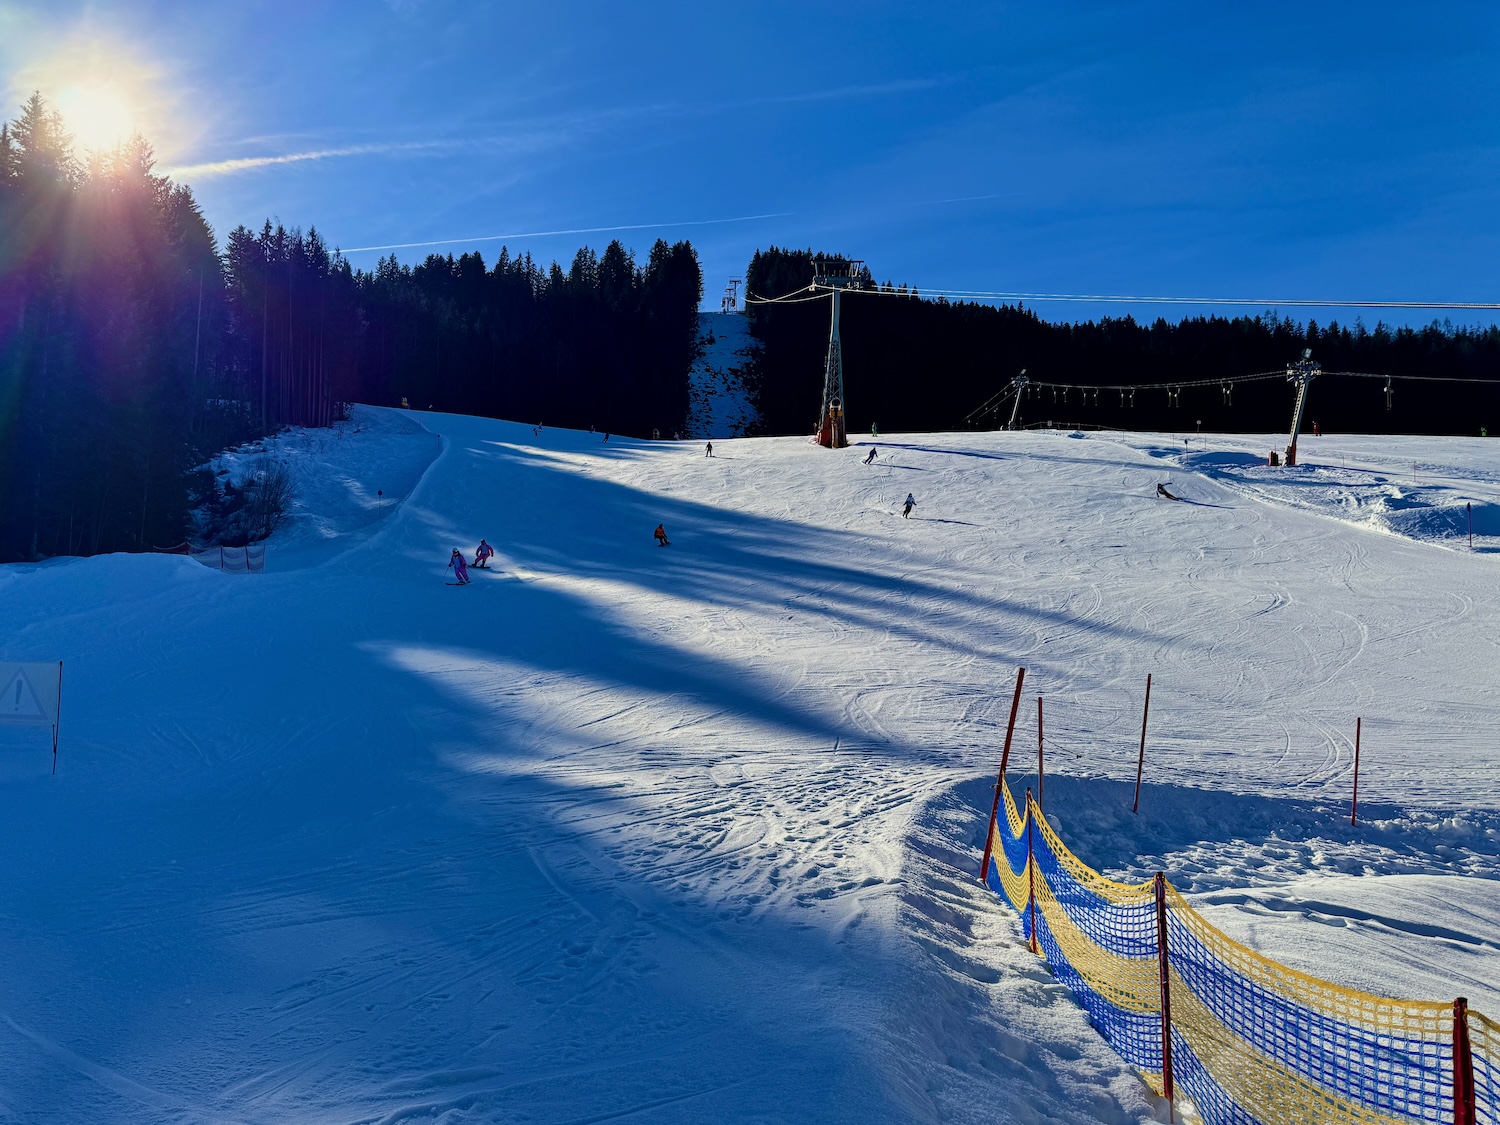 The blue piste at the Fieberbrunn valley station is our first major challenge. Photo: Sascha Tegtmeyer ski vacation in Fieberbrunn winter vacation travel report experience report experiences